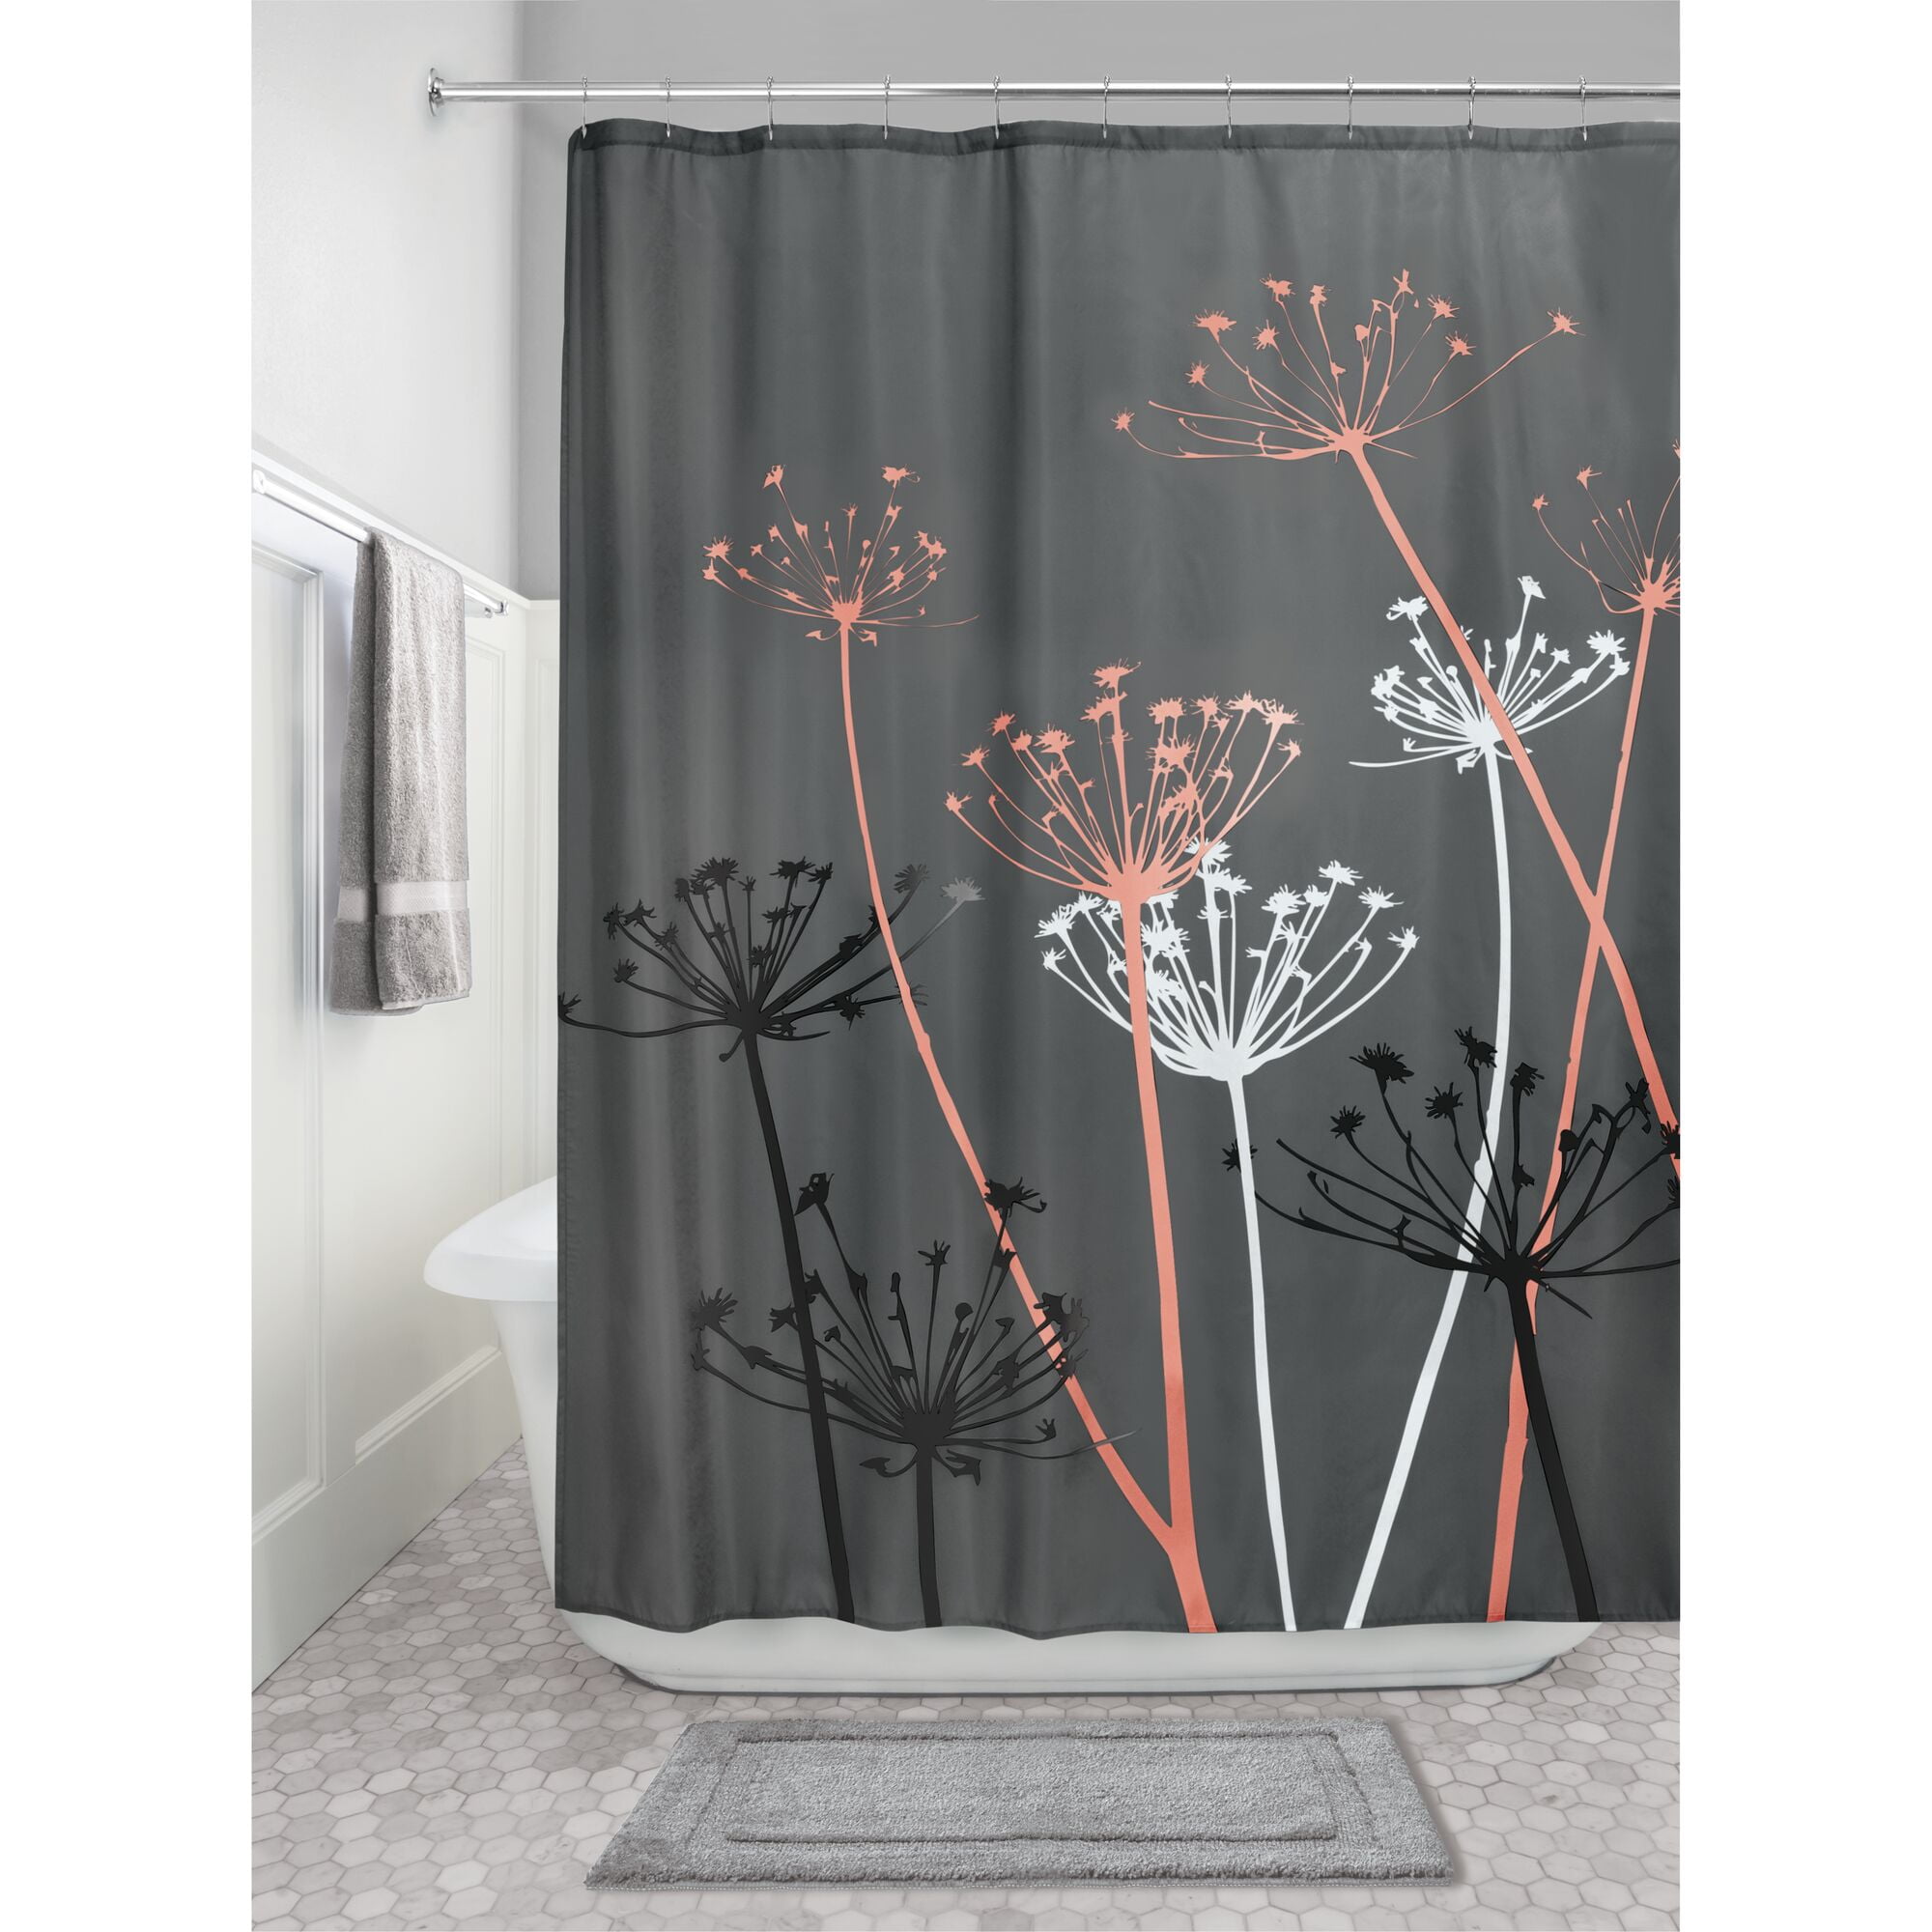 Thistle Shower Curtain Gray Blue Polyester Waterproof &12 Rings Bathroom Decor 